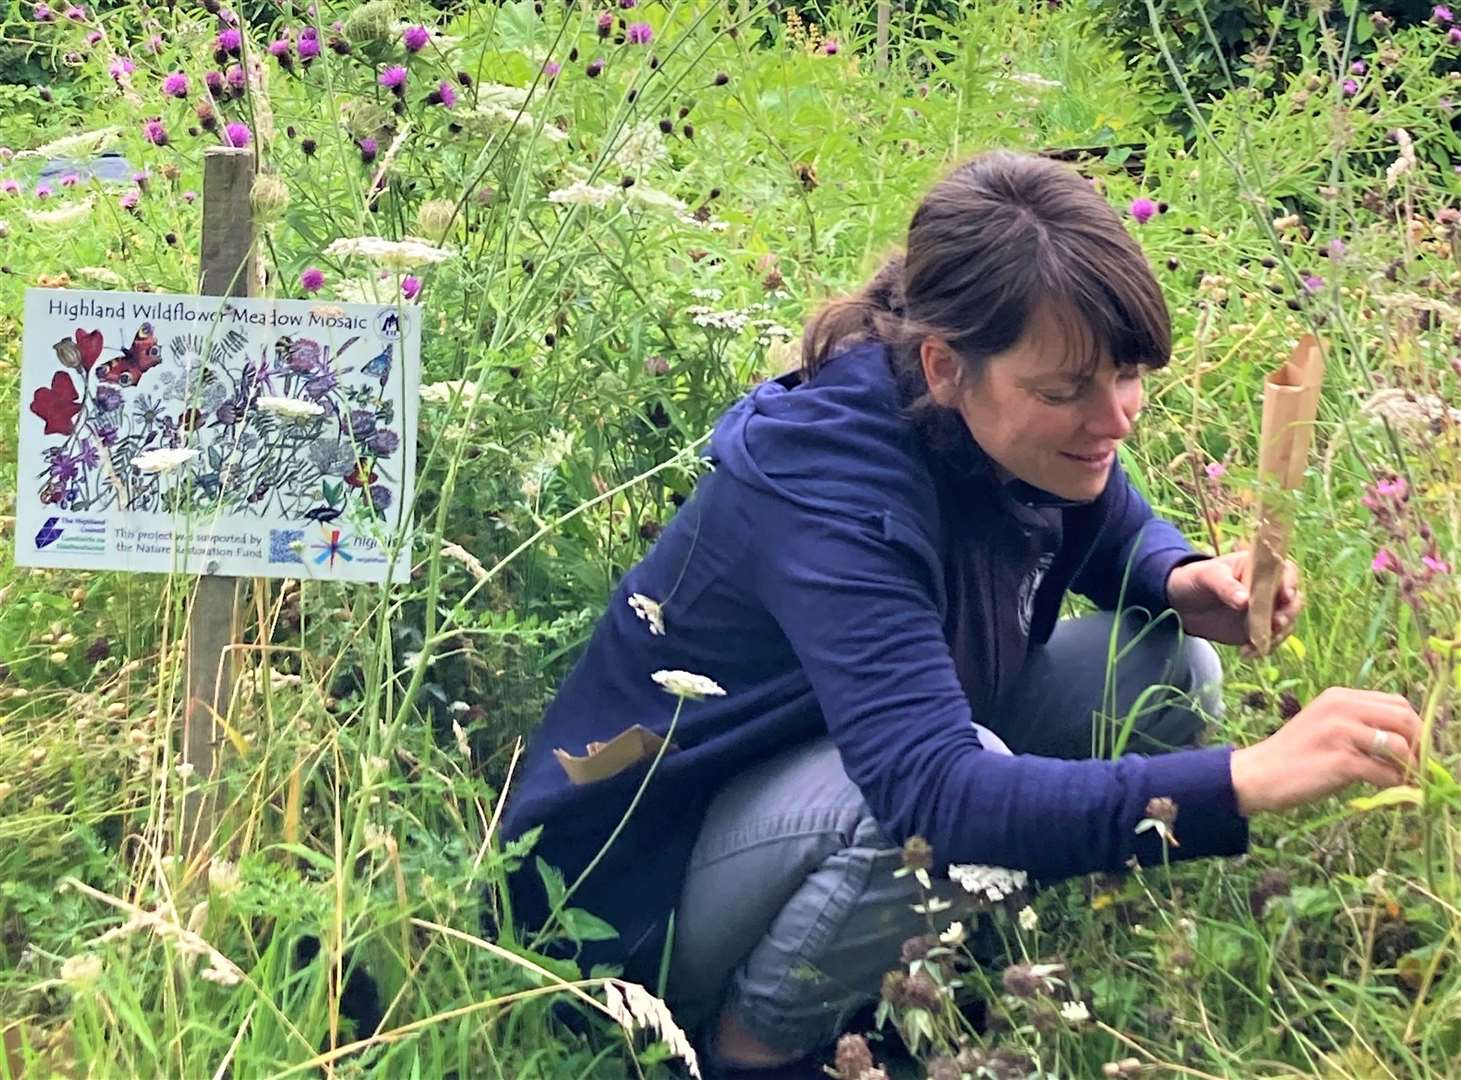 Jenny Grant: 'Members of the public are invited to engage with the experts, mingle with fellow nature lovers, and leave armed with the knowledge to make a difference.'